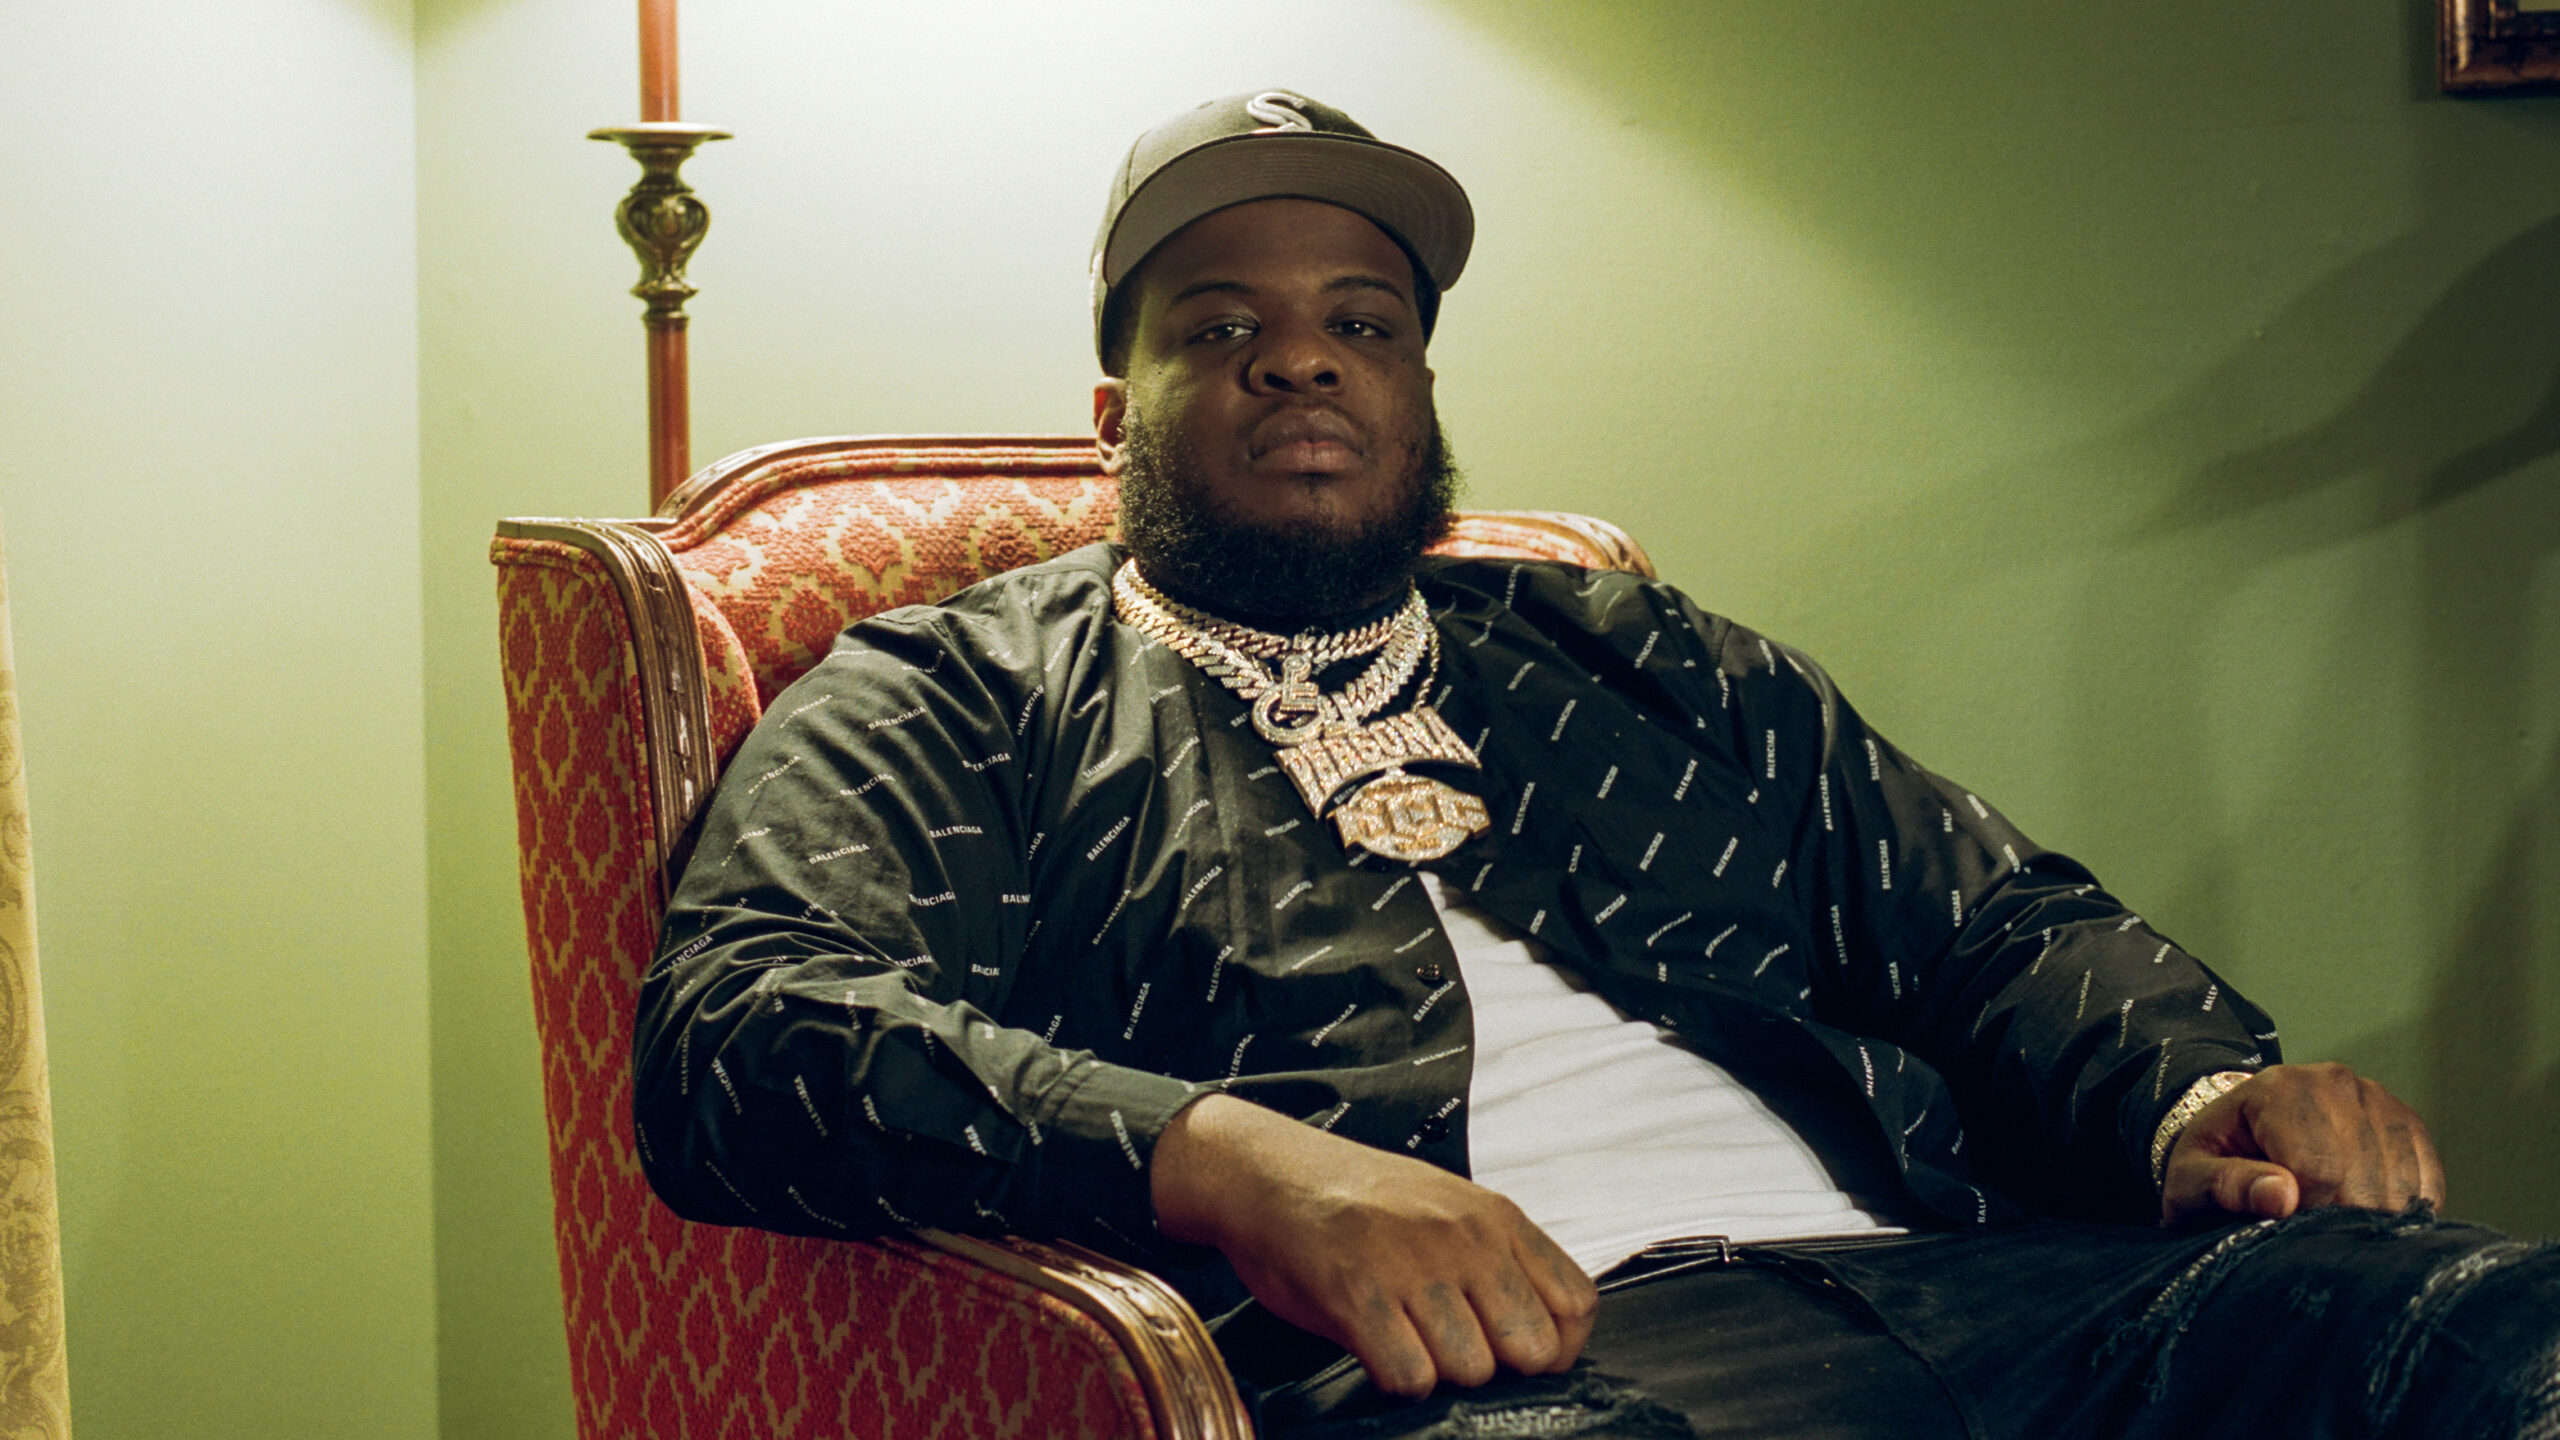 Featured image for “On ‘Weight of the World,’ Maxo Kream’s world expands amid personal tragedy”